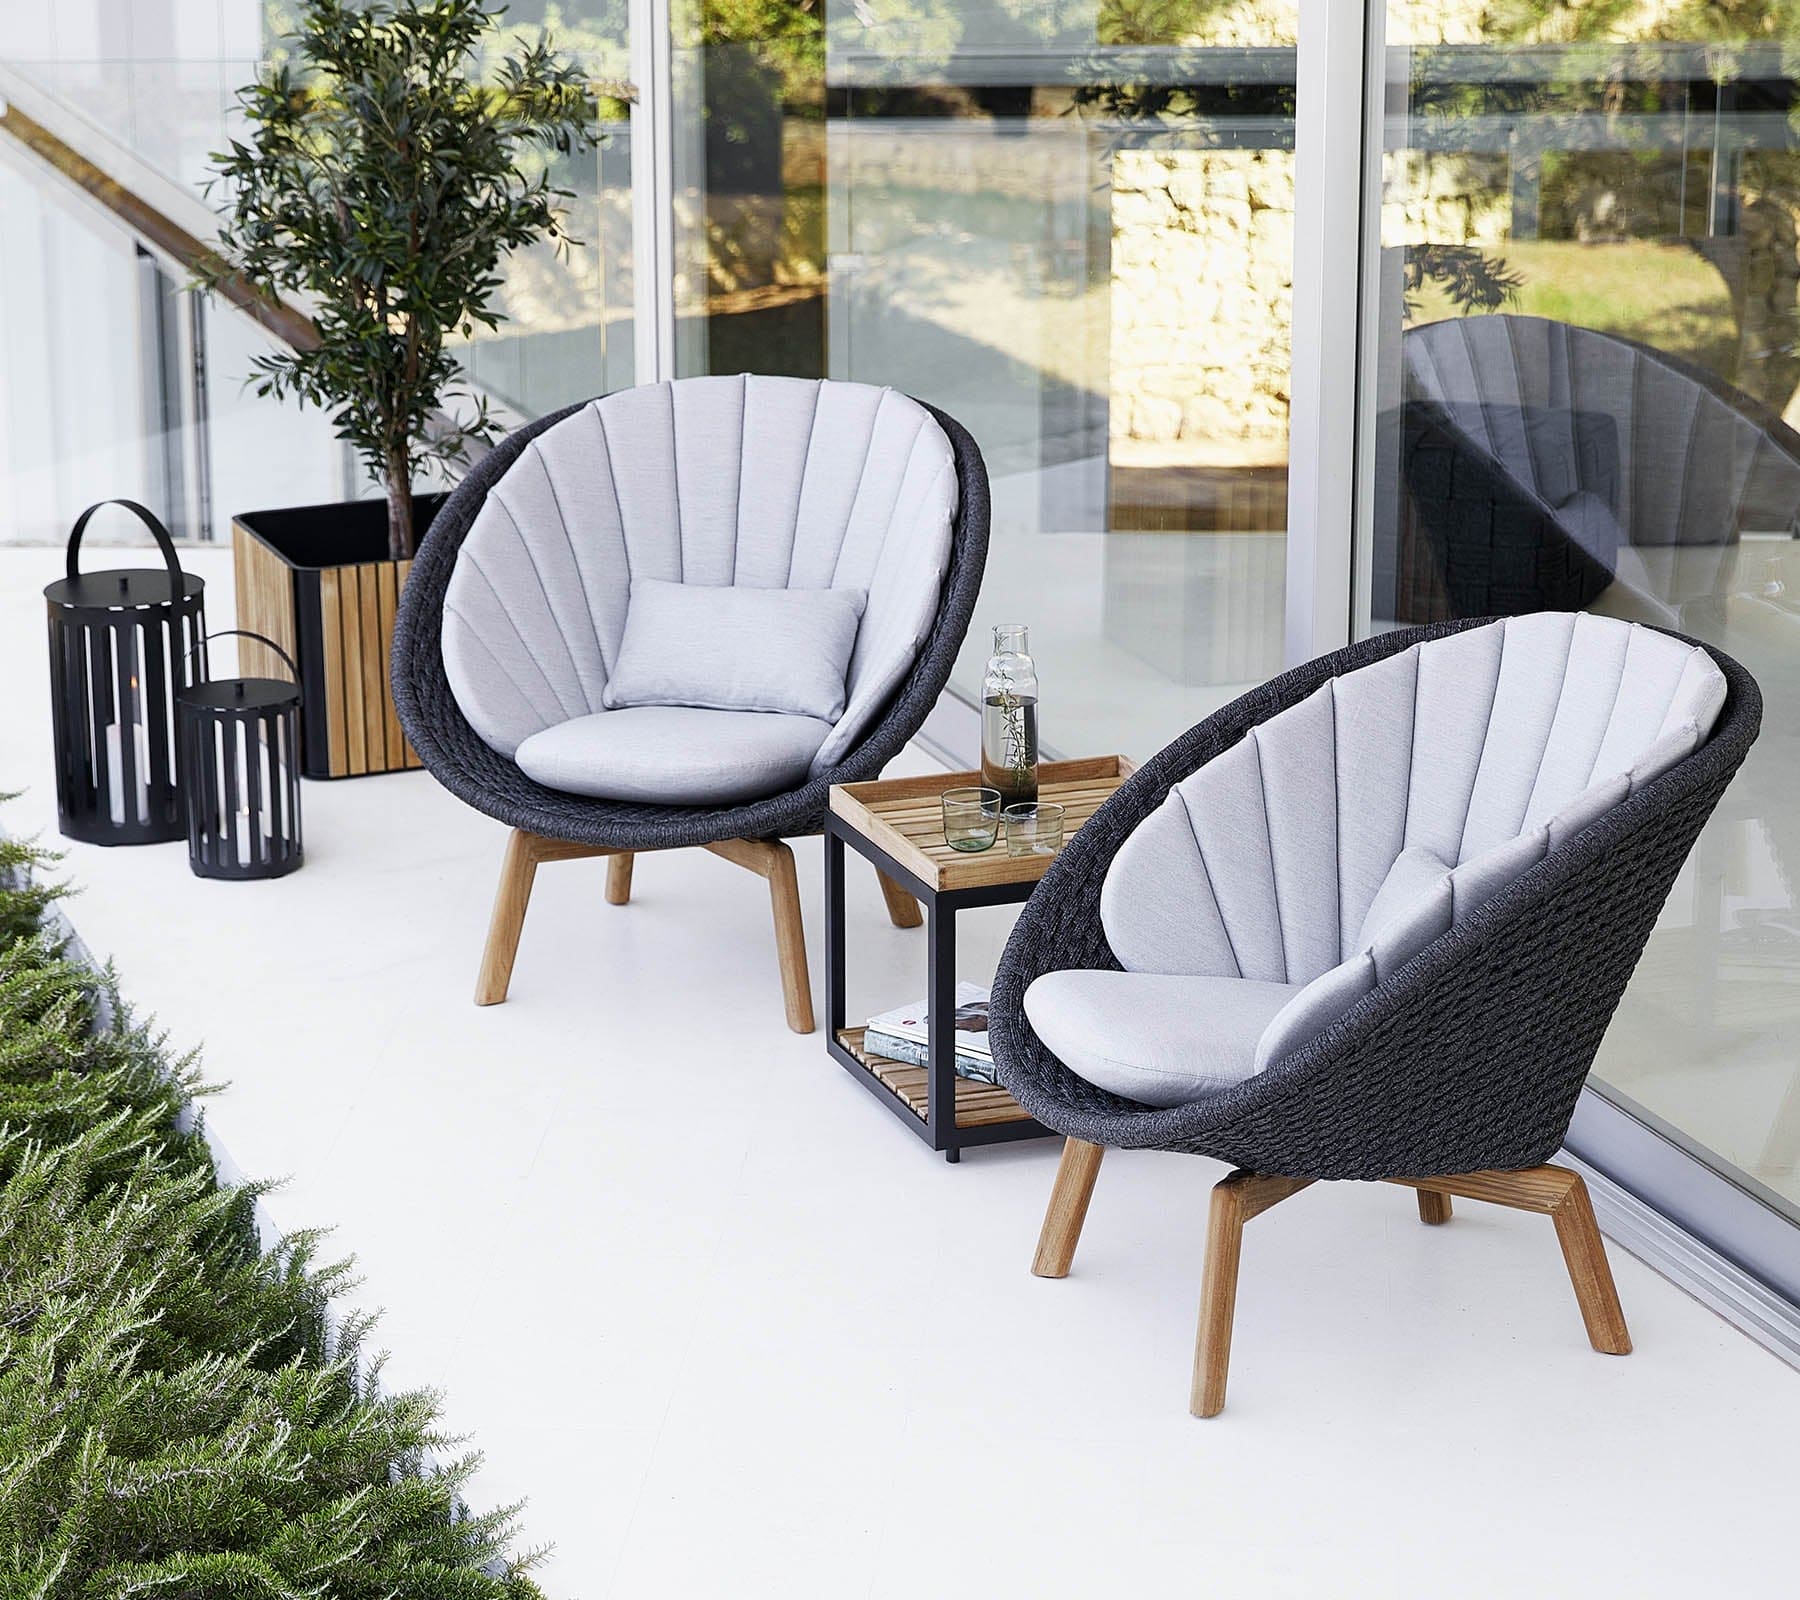 Boxhill's Peacock dark grey outdoor lounge chair with small outdoor teak coffee table placed beside glass wall